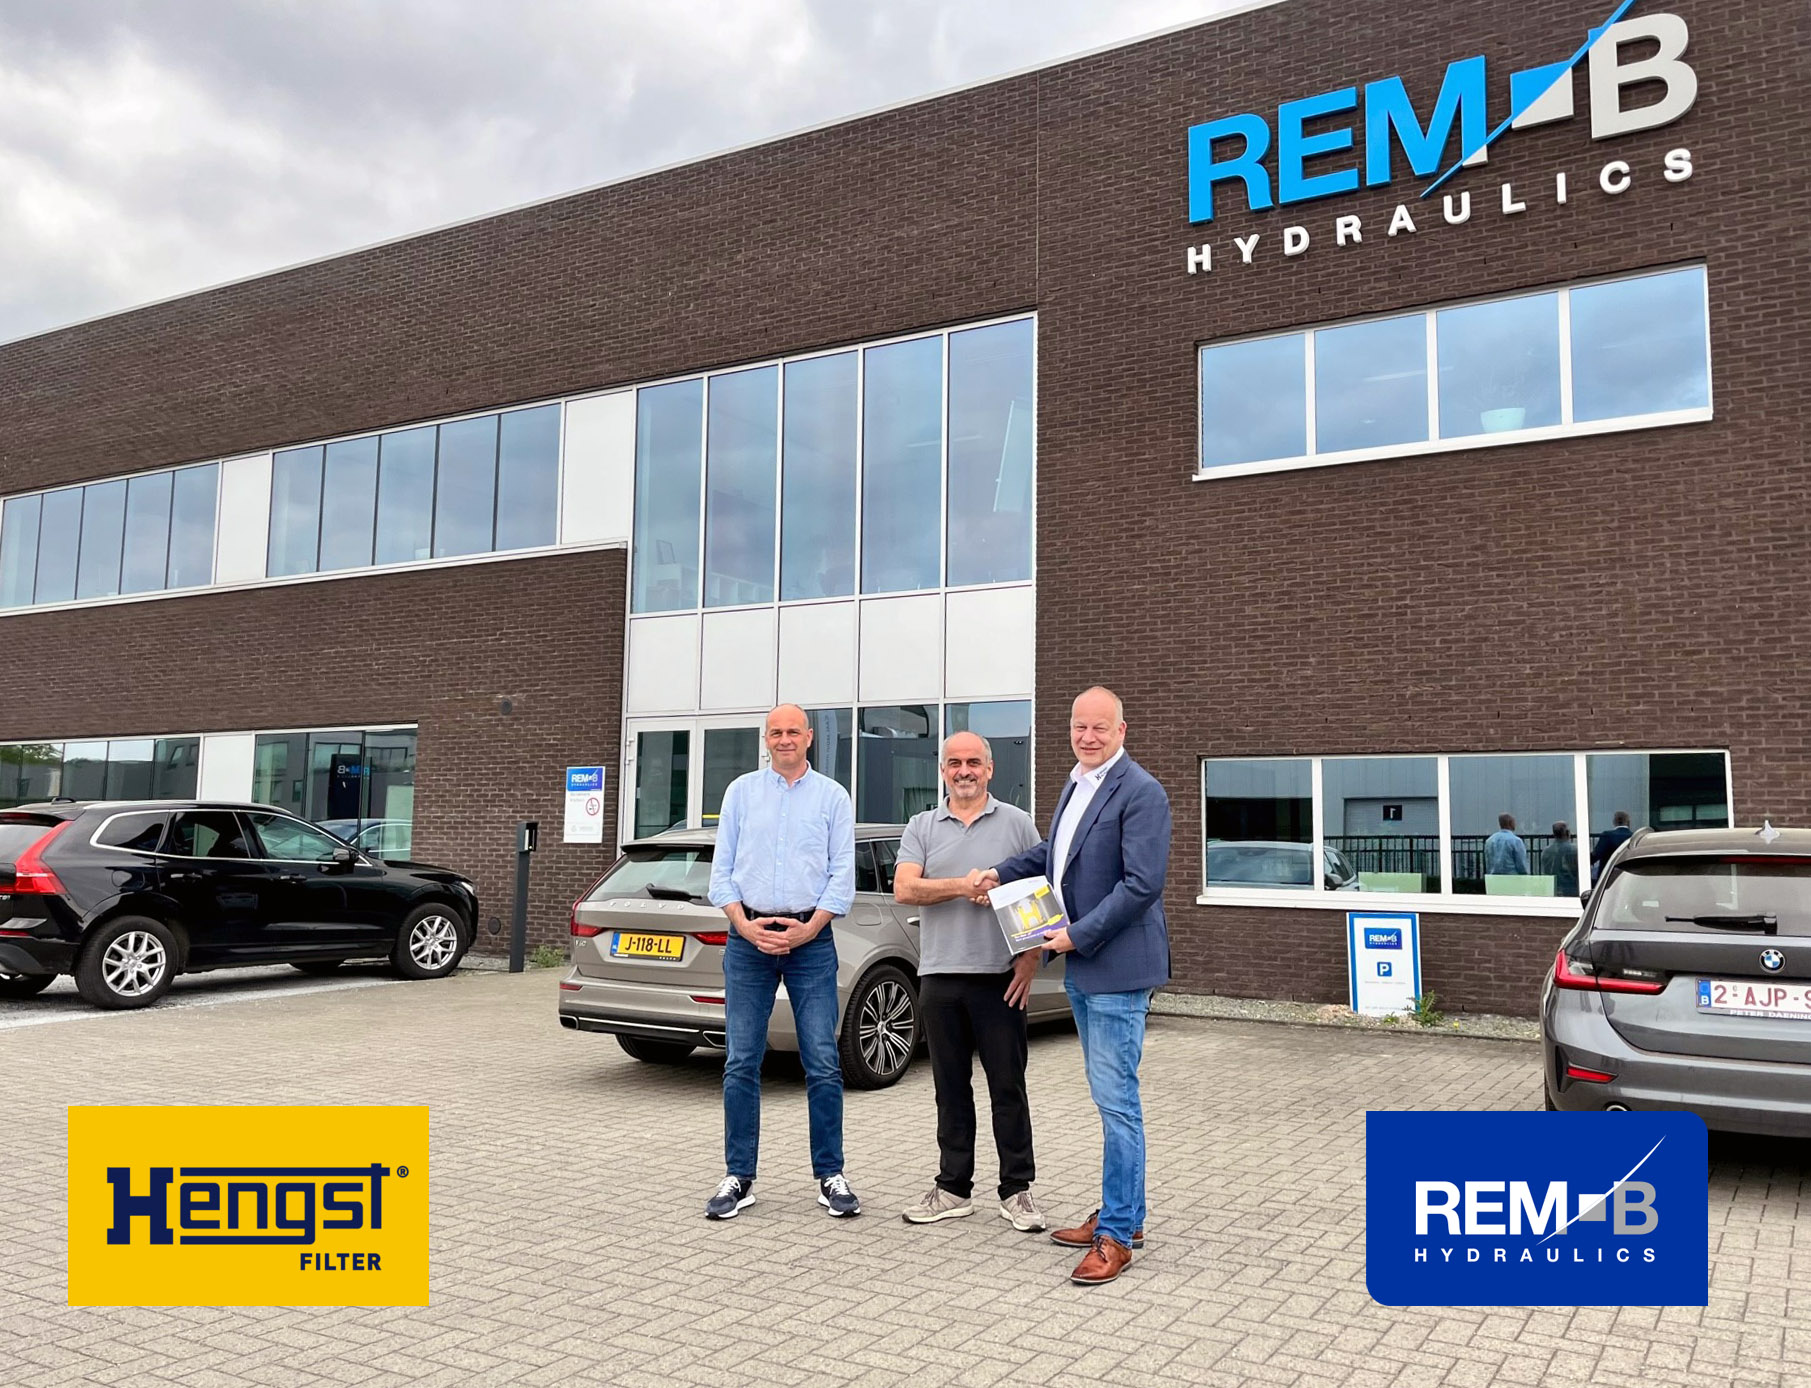 REMB HYDRAULICS is an official Hengst filtration distributor